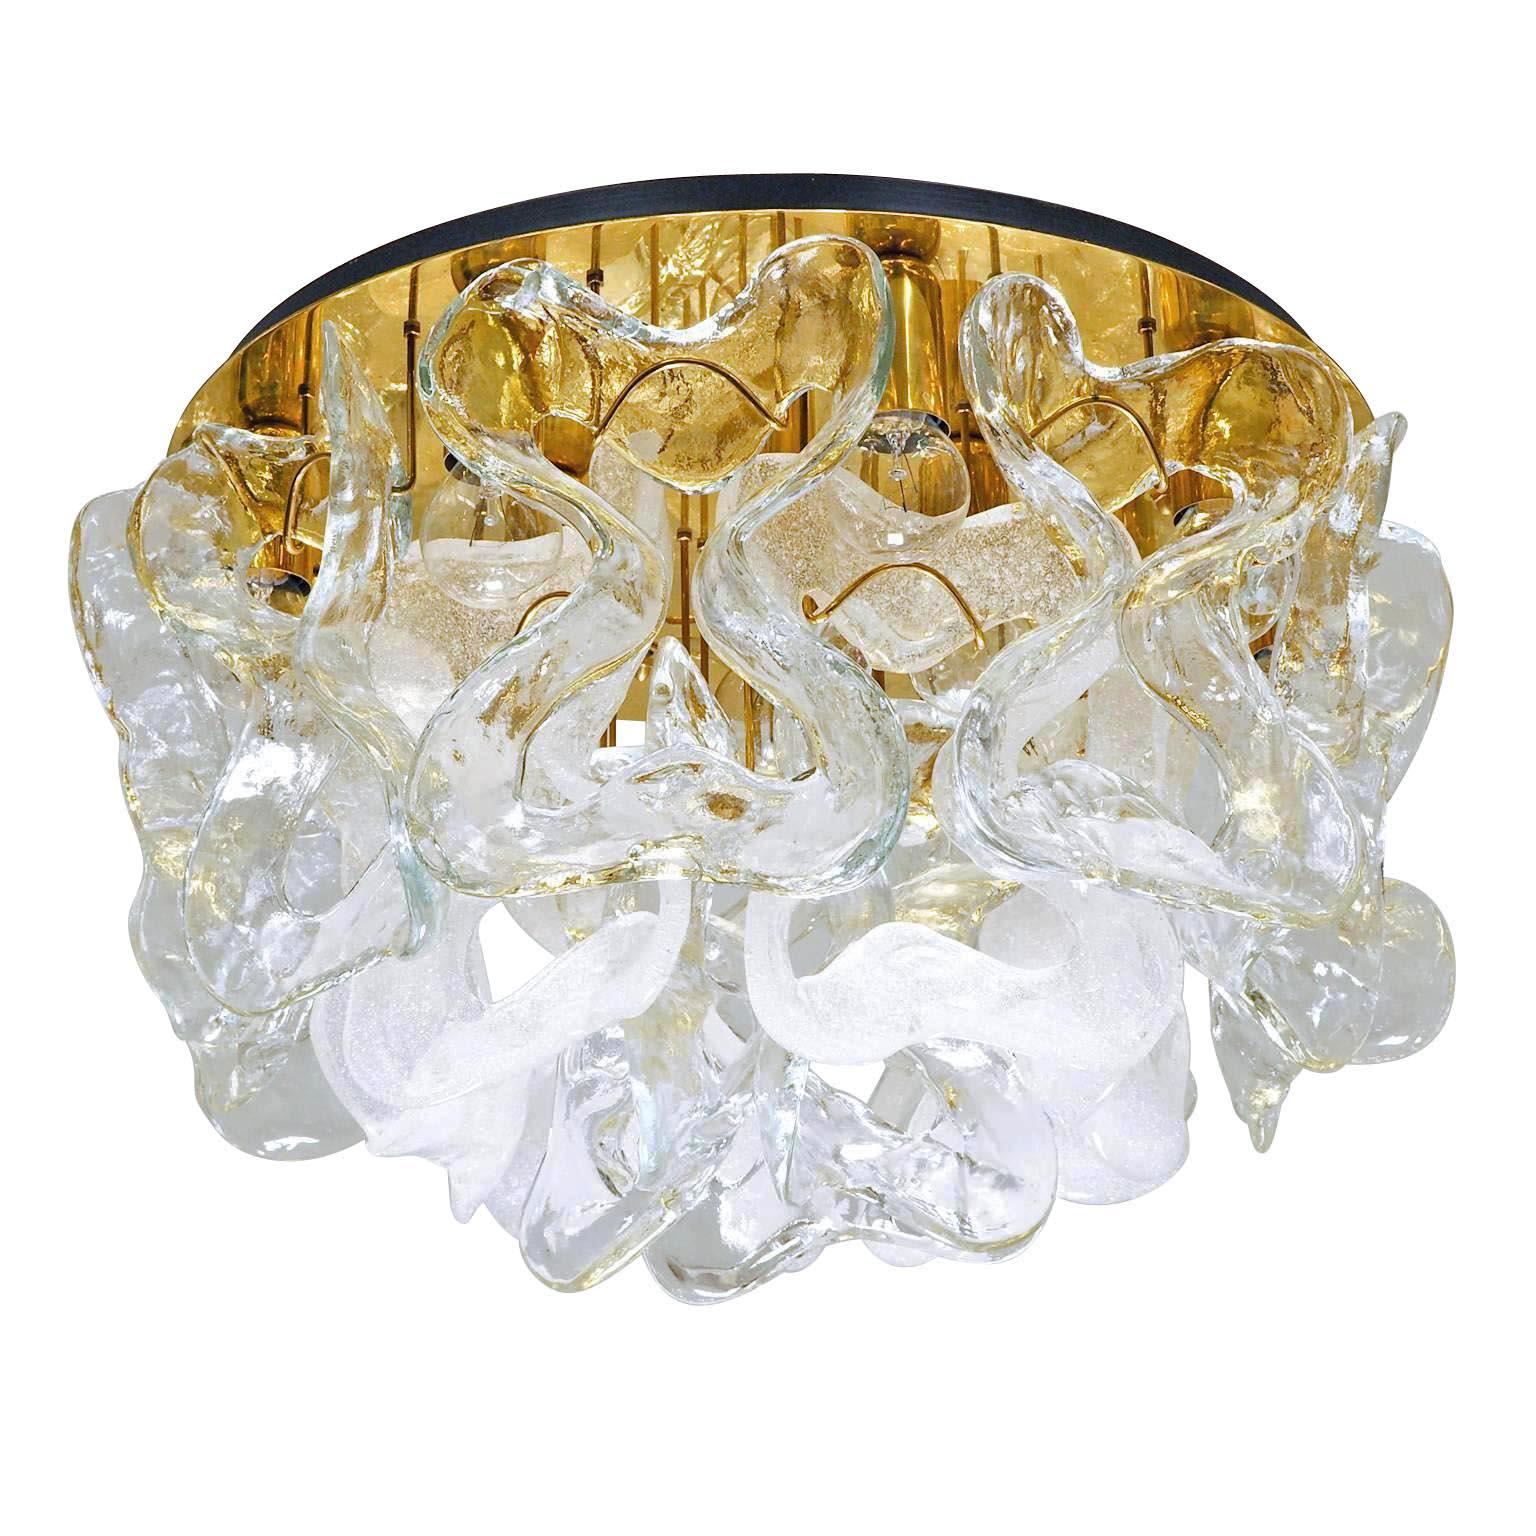 One of four gorgeous flush mounts model 'Catena' by Kalmar, Vienna, Austria, manufactured in midcentury, circa 1970 (late 1960s or 1970s).
18 large 'ribbons' in clear (12 pieces) and white bubble Murano glass (6 pieces) hang on a polished brass